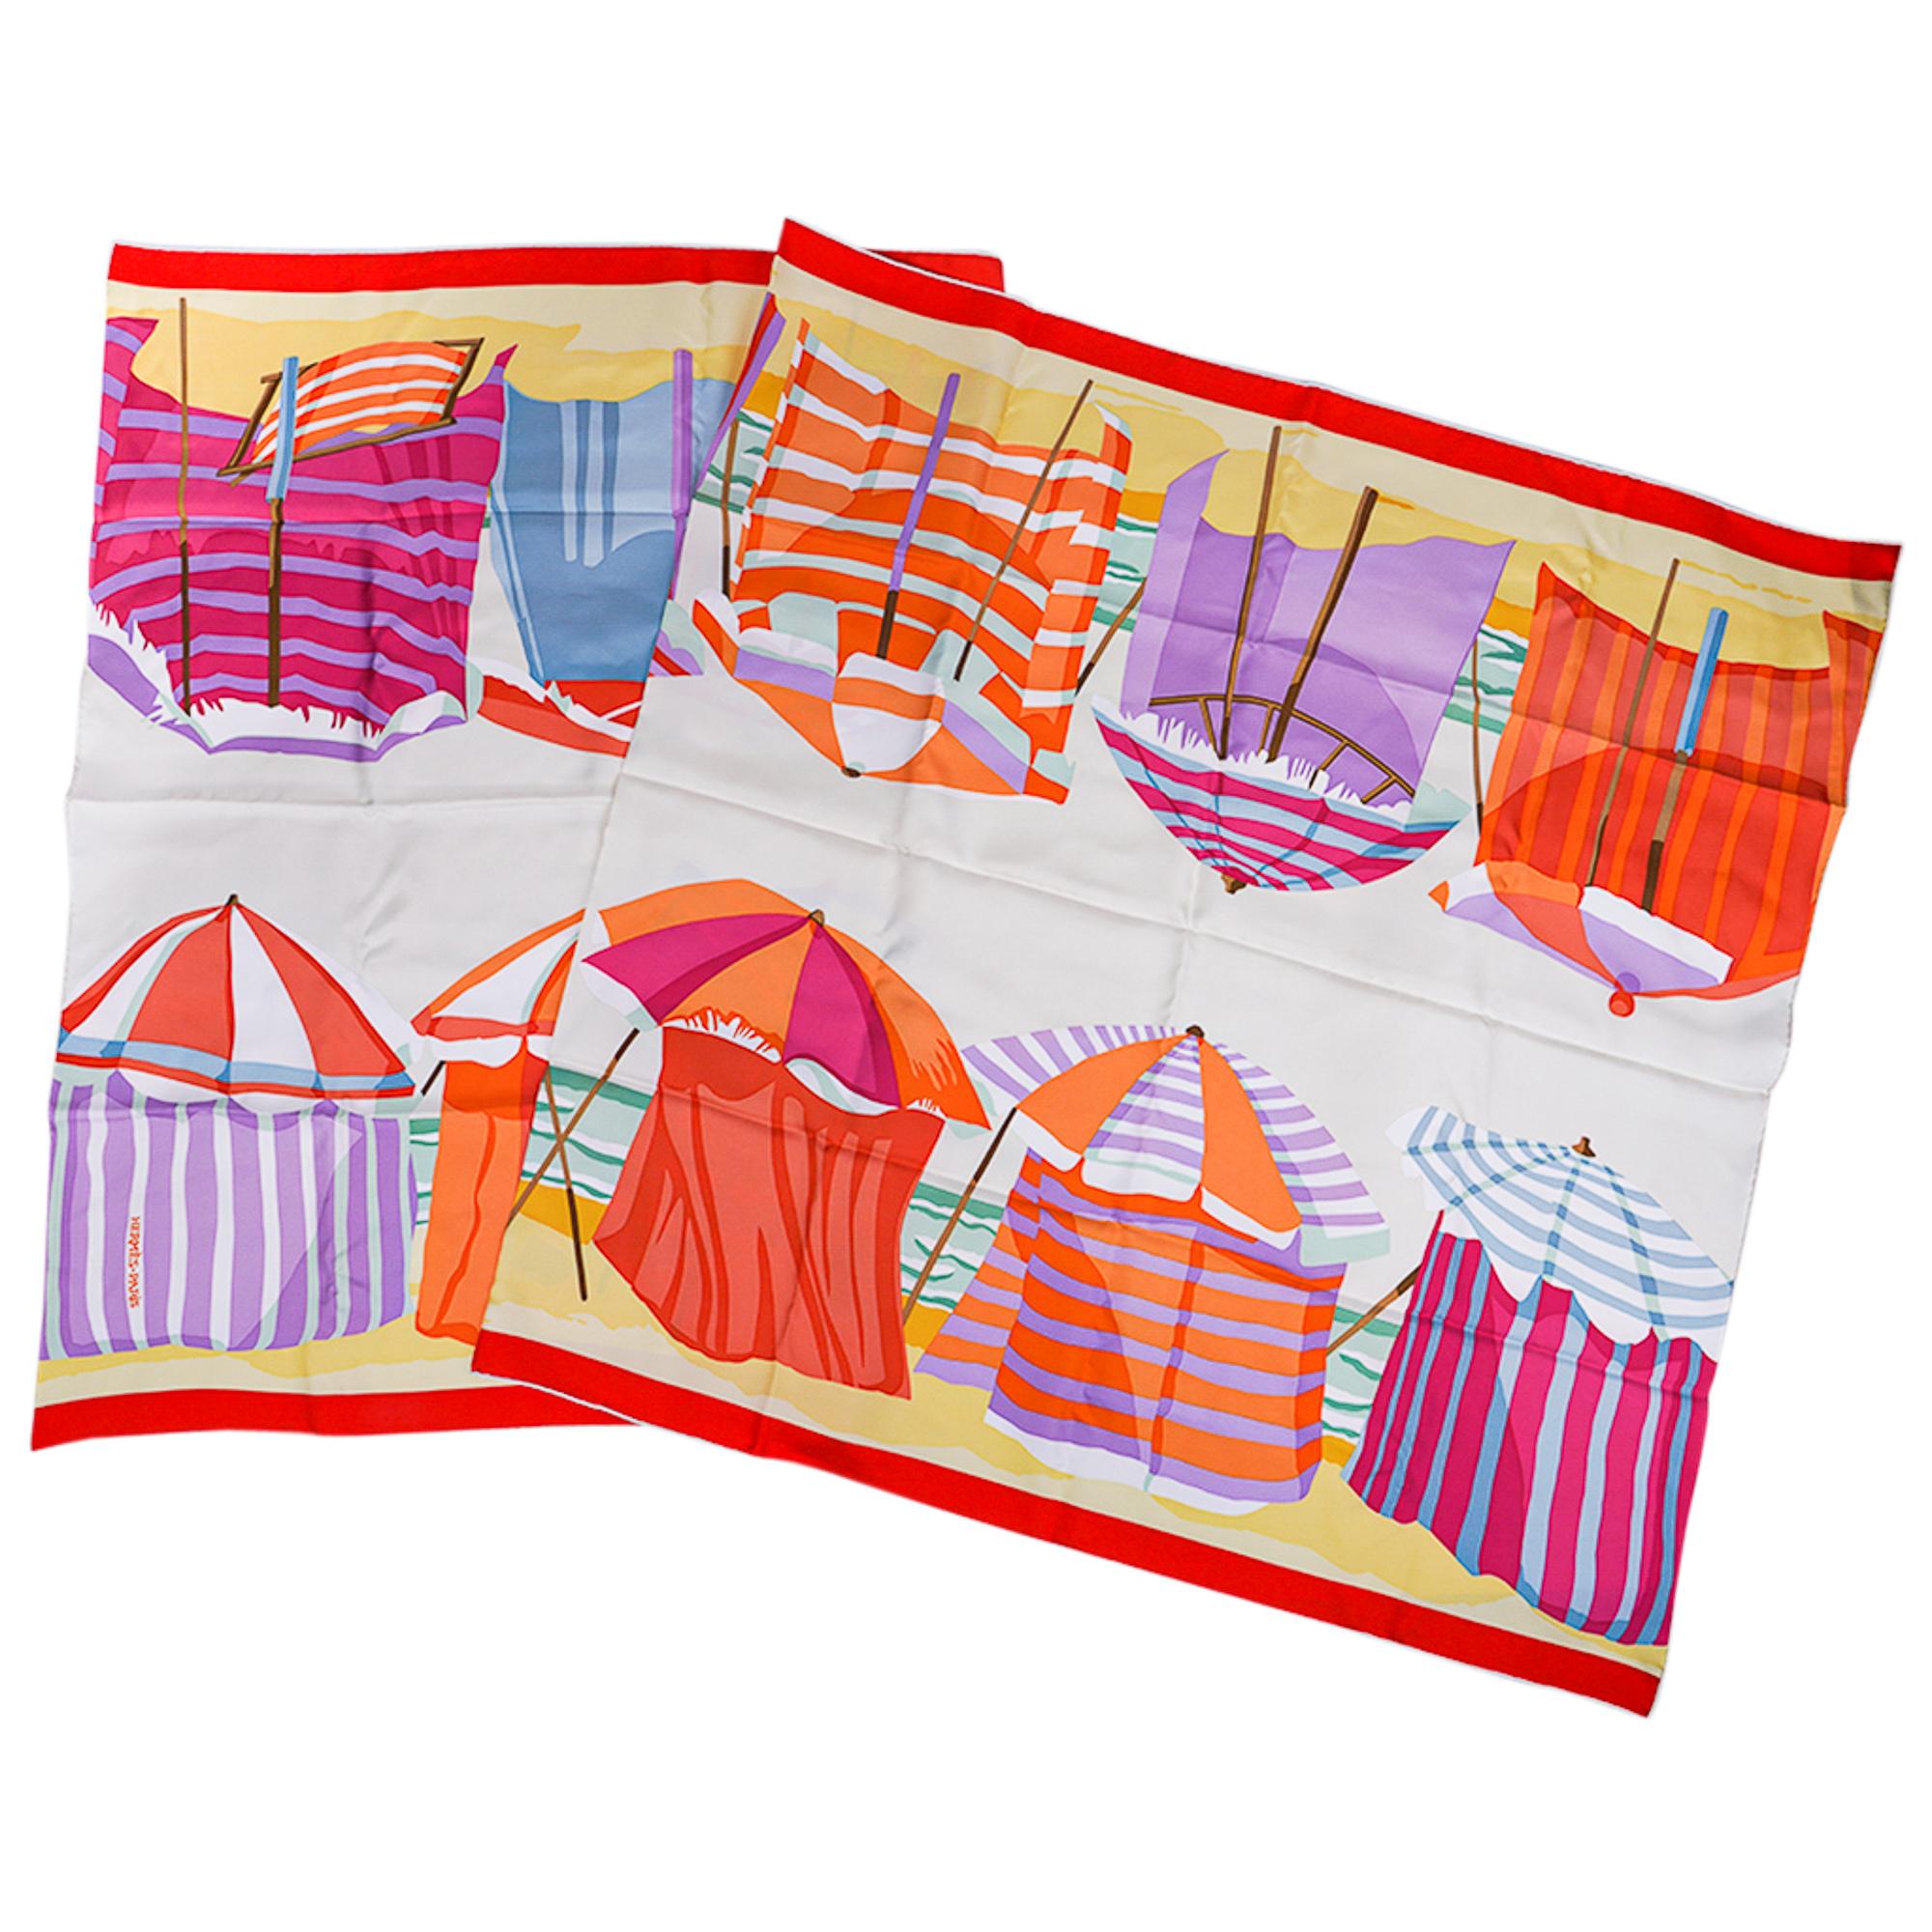 Mightychic offers an Hermes Charmes des Plages Normandes Rectangle silk rectangular scarf.
Featured in Nacre and Grenadine colorway.
Depicts the colorful beach tents on the beautiful beaches of Normandy, i.e. Deauville and Trouville.
This beautiful